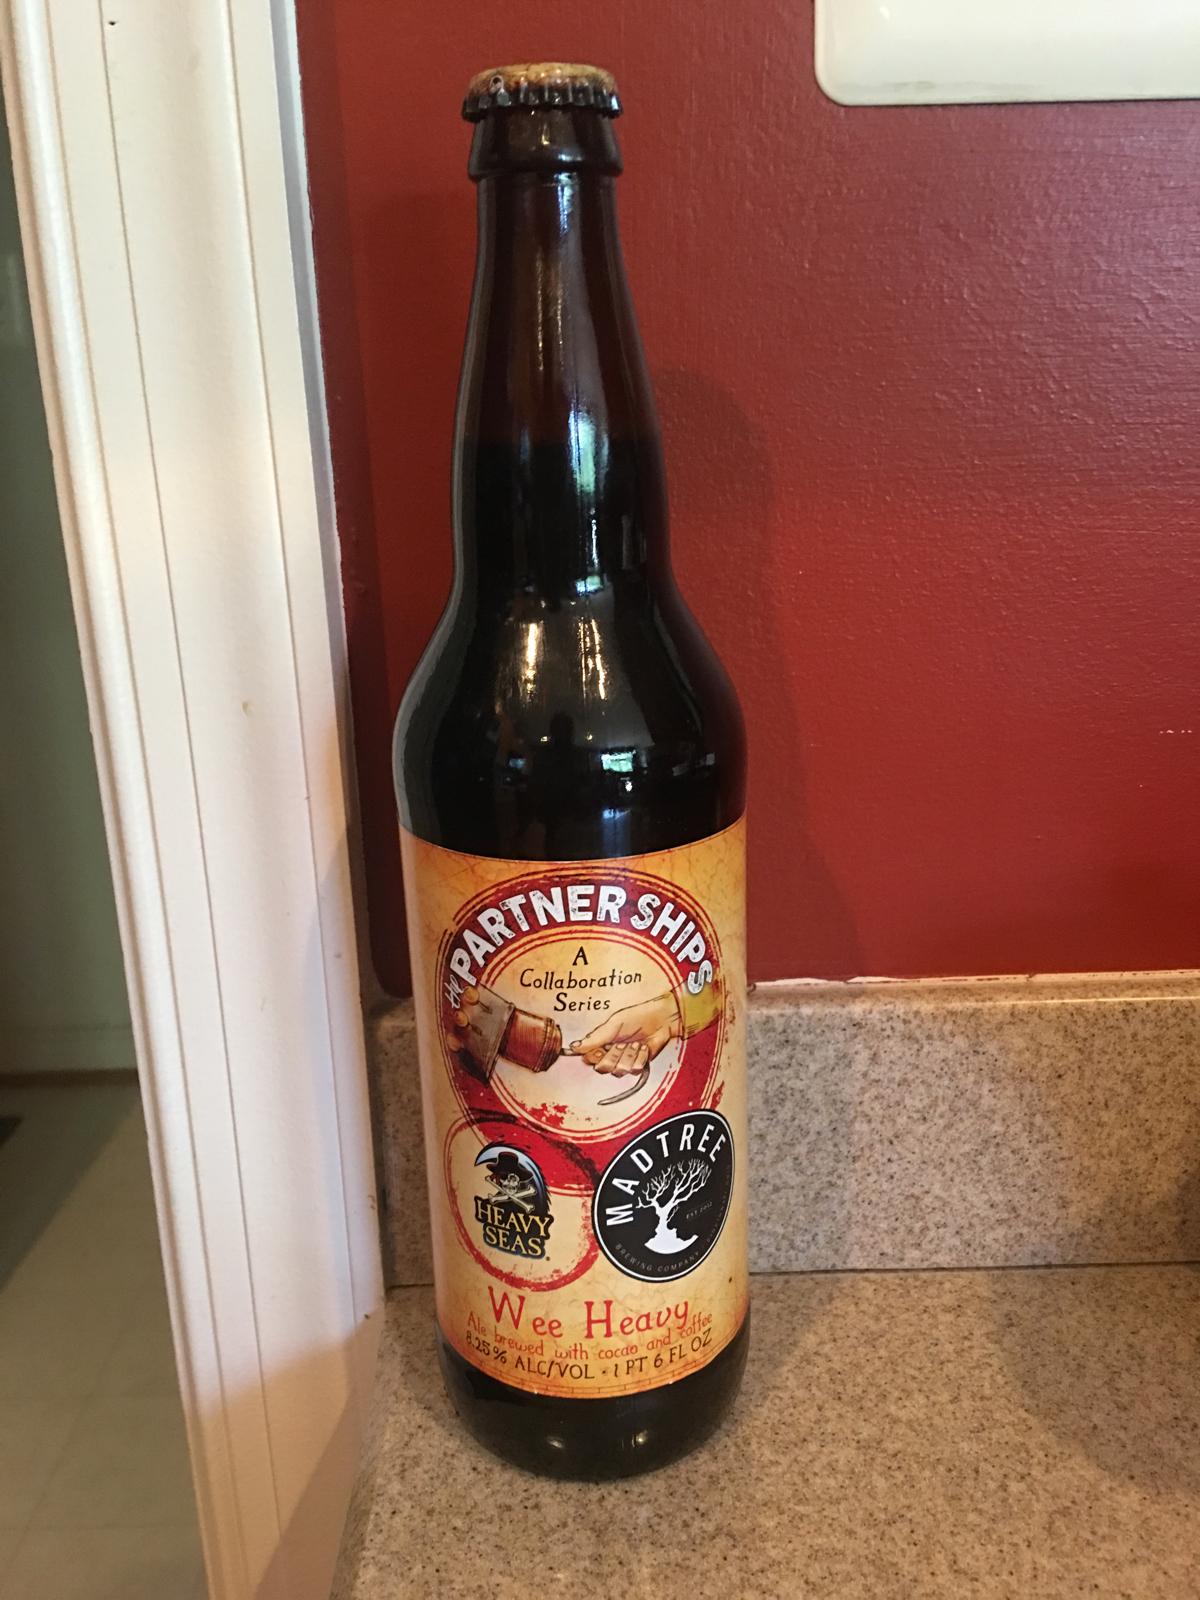 Partner Ships: Wee Heavy (Collaboration with MadTree)